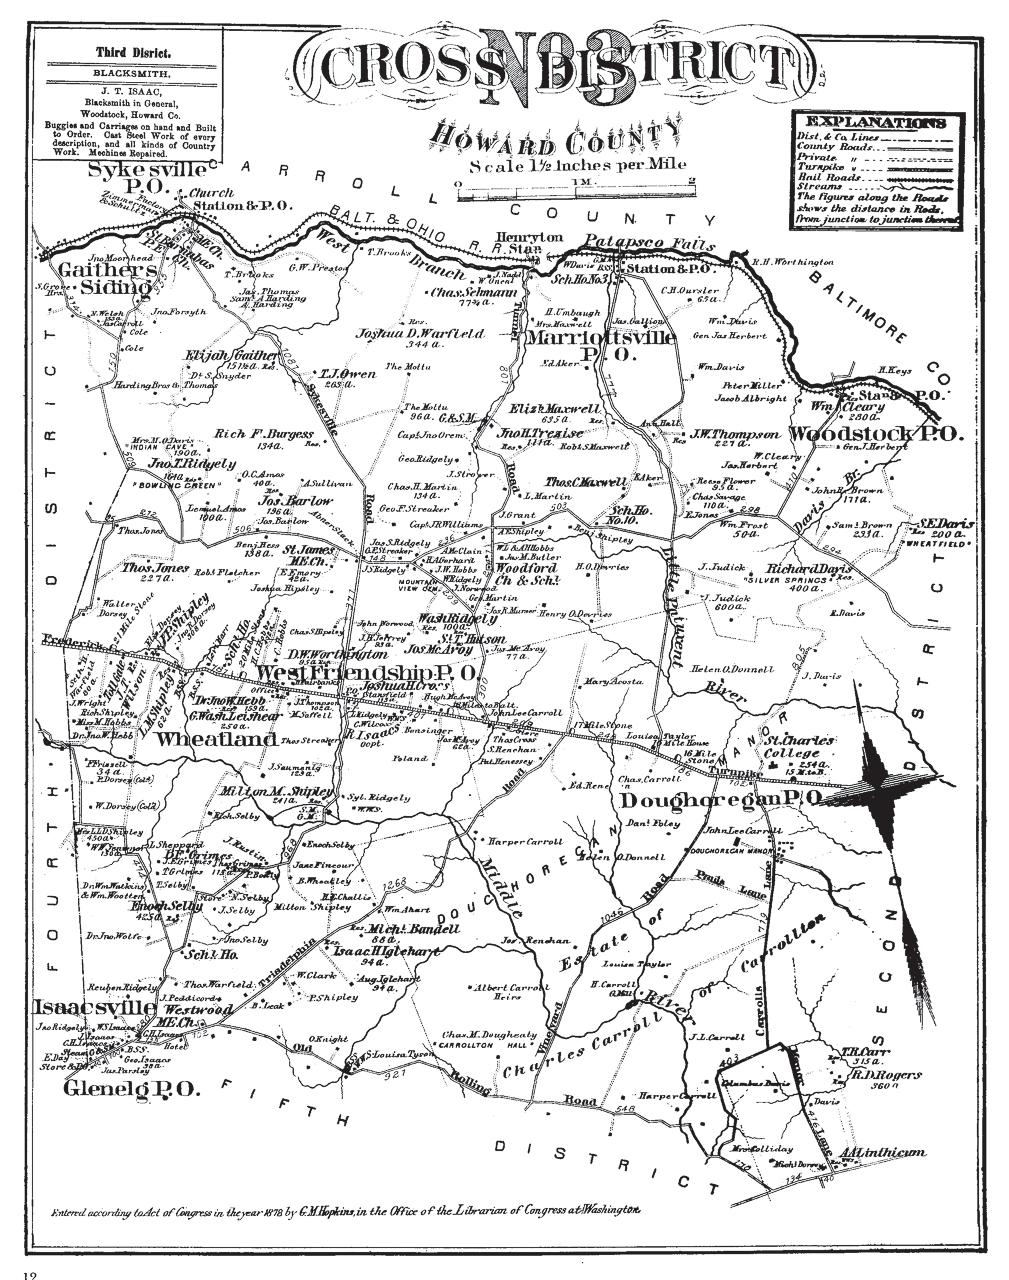 1878 Map The star indicates the location of Ranter s Ridge near the Howard/Baltimore County line.